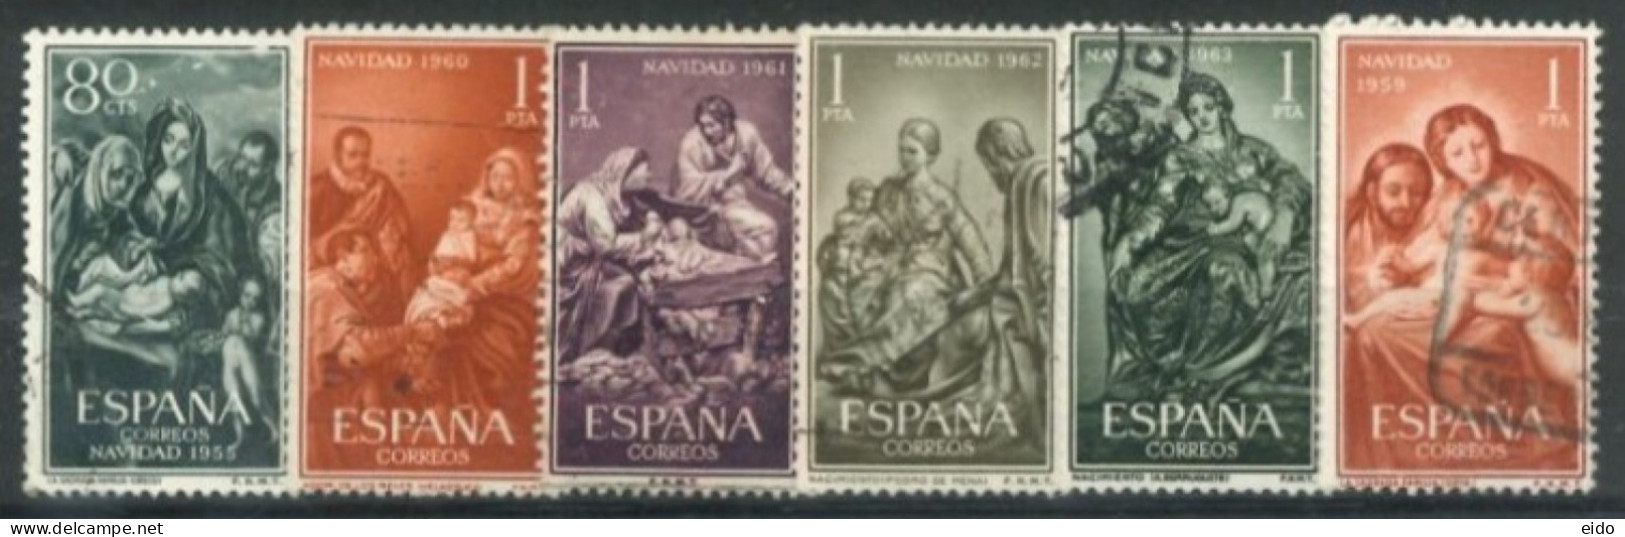 SPAIN, 1955/63, HOLY FAMILY STAMPS SET OF 6, USED. - Used Stamps